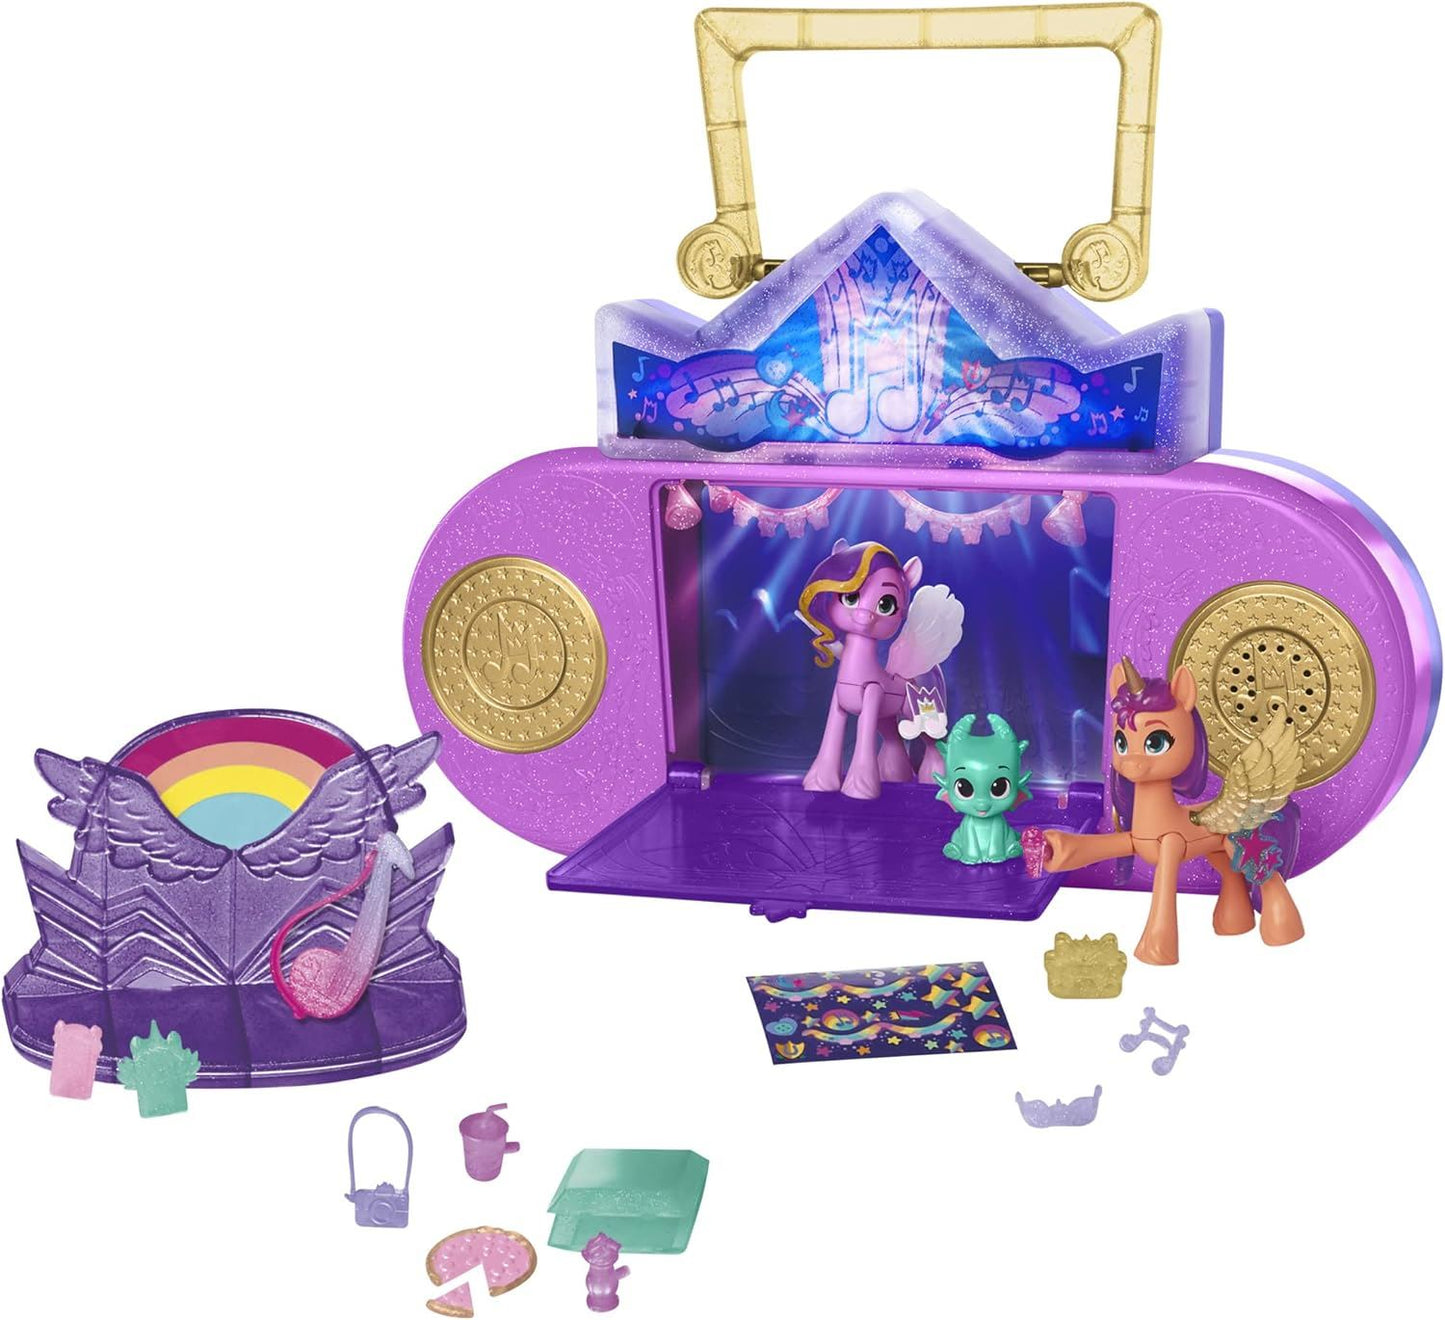 My Little Pony: A New Generation Royal Gala Collection Figures (9-Pack) F2031